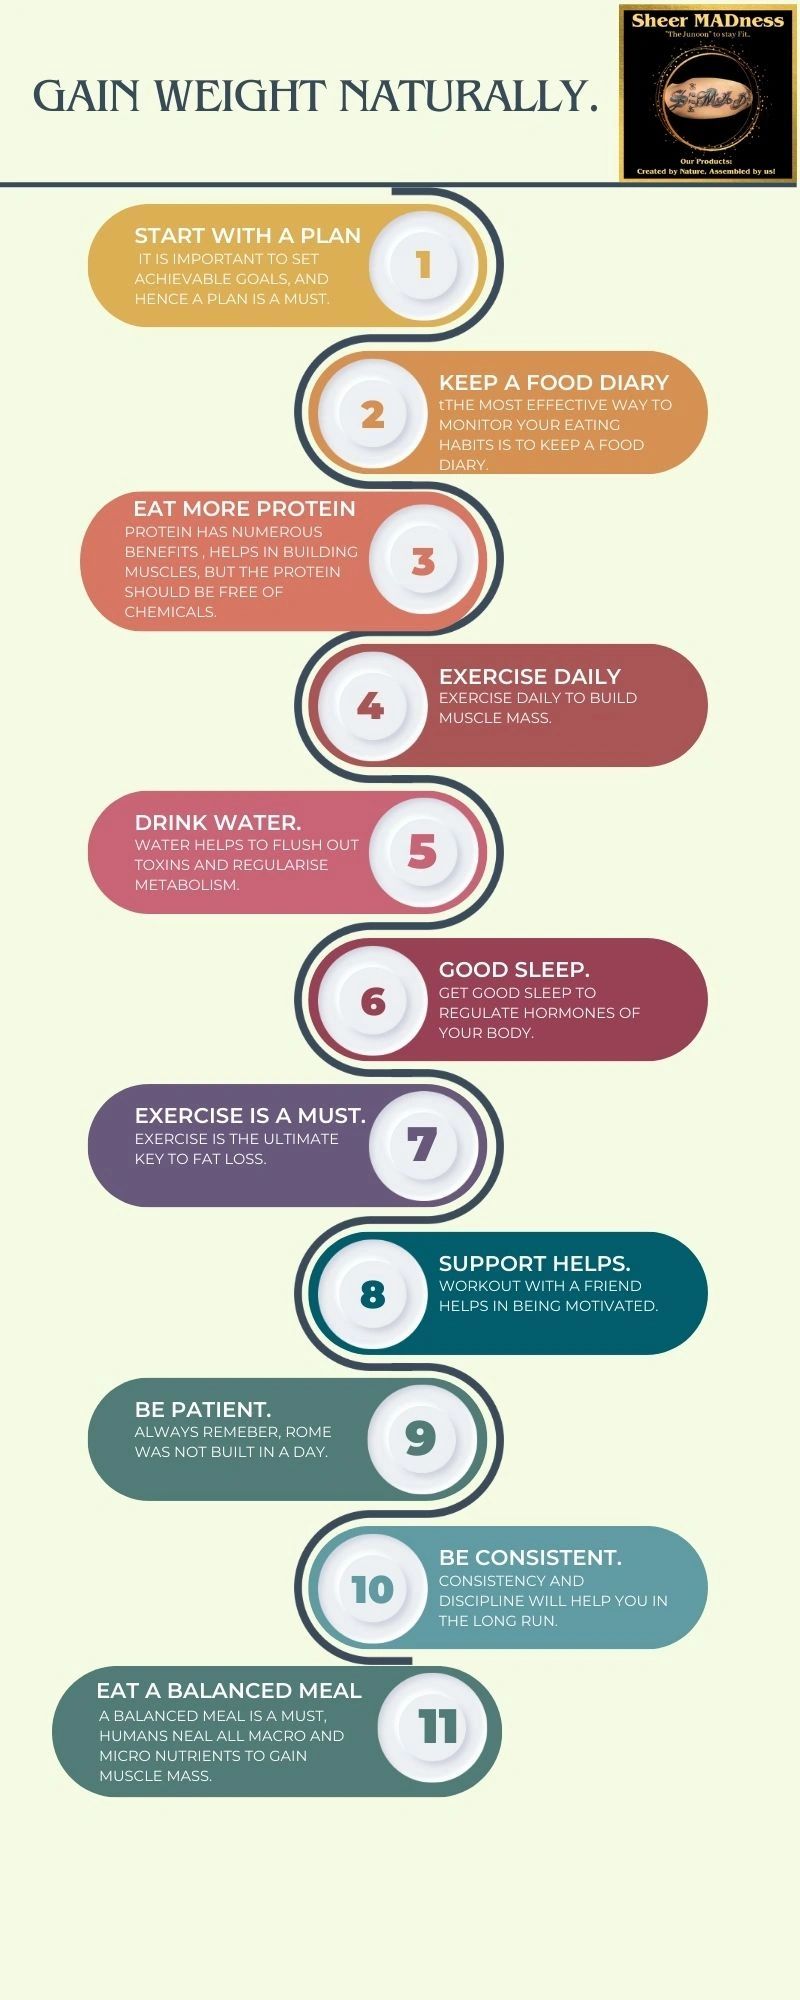 Steps to gain weight by increasing muscle mass.